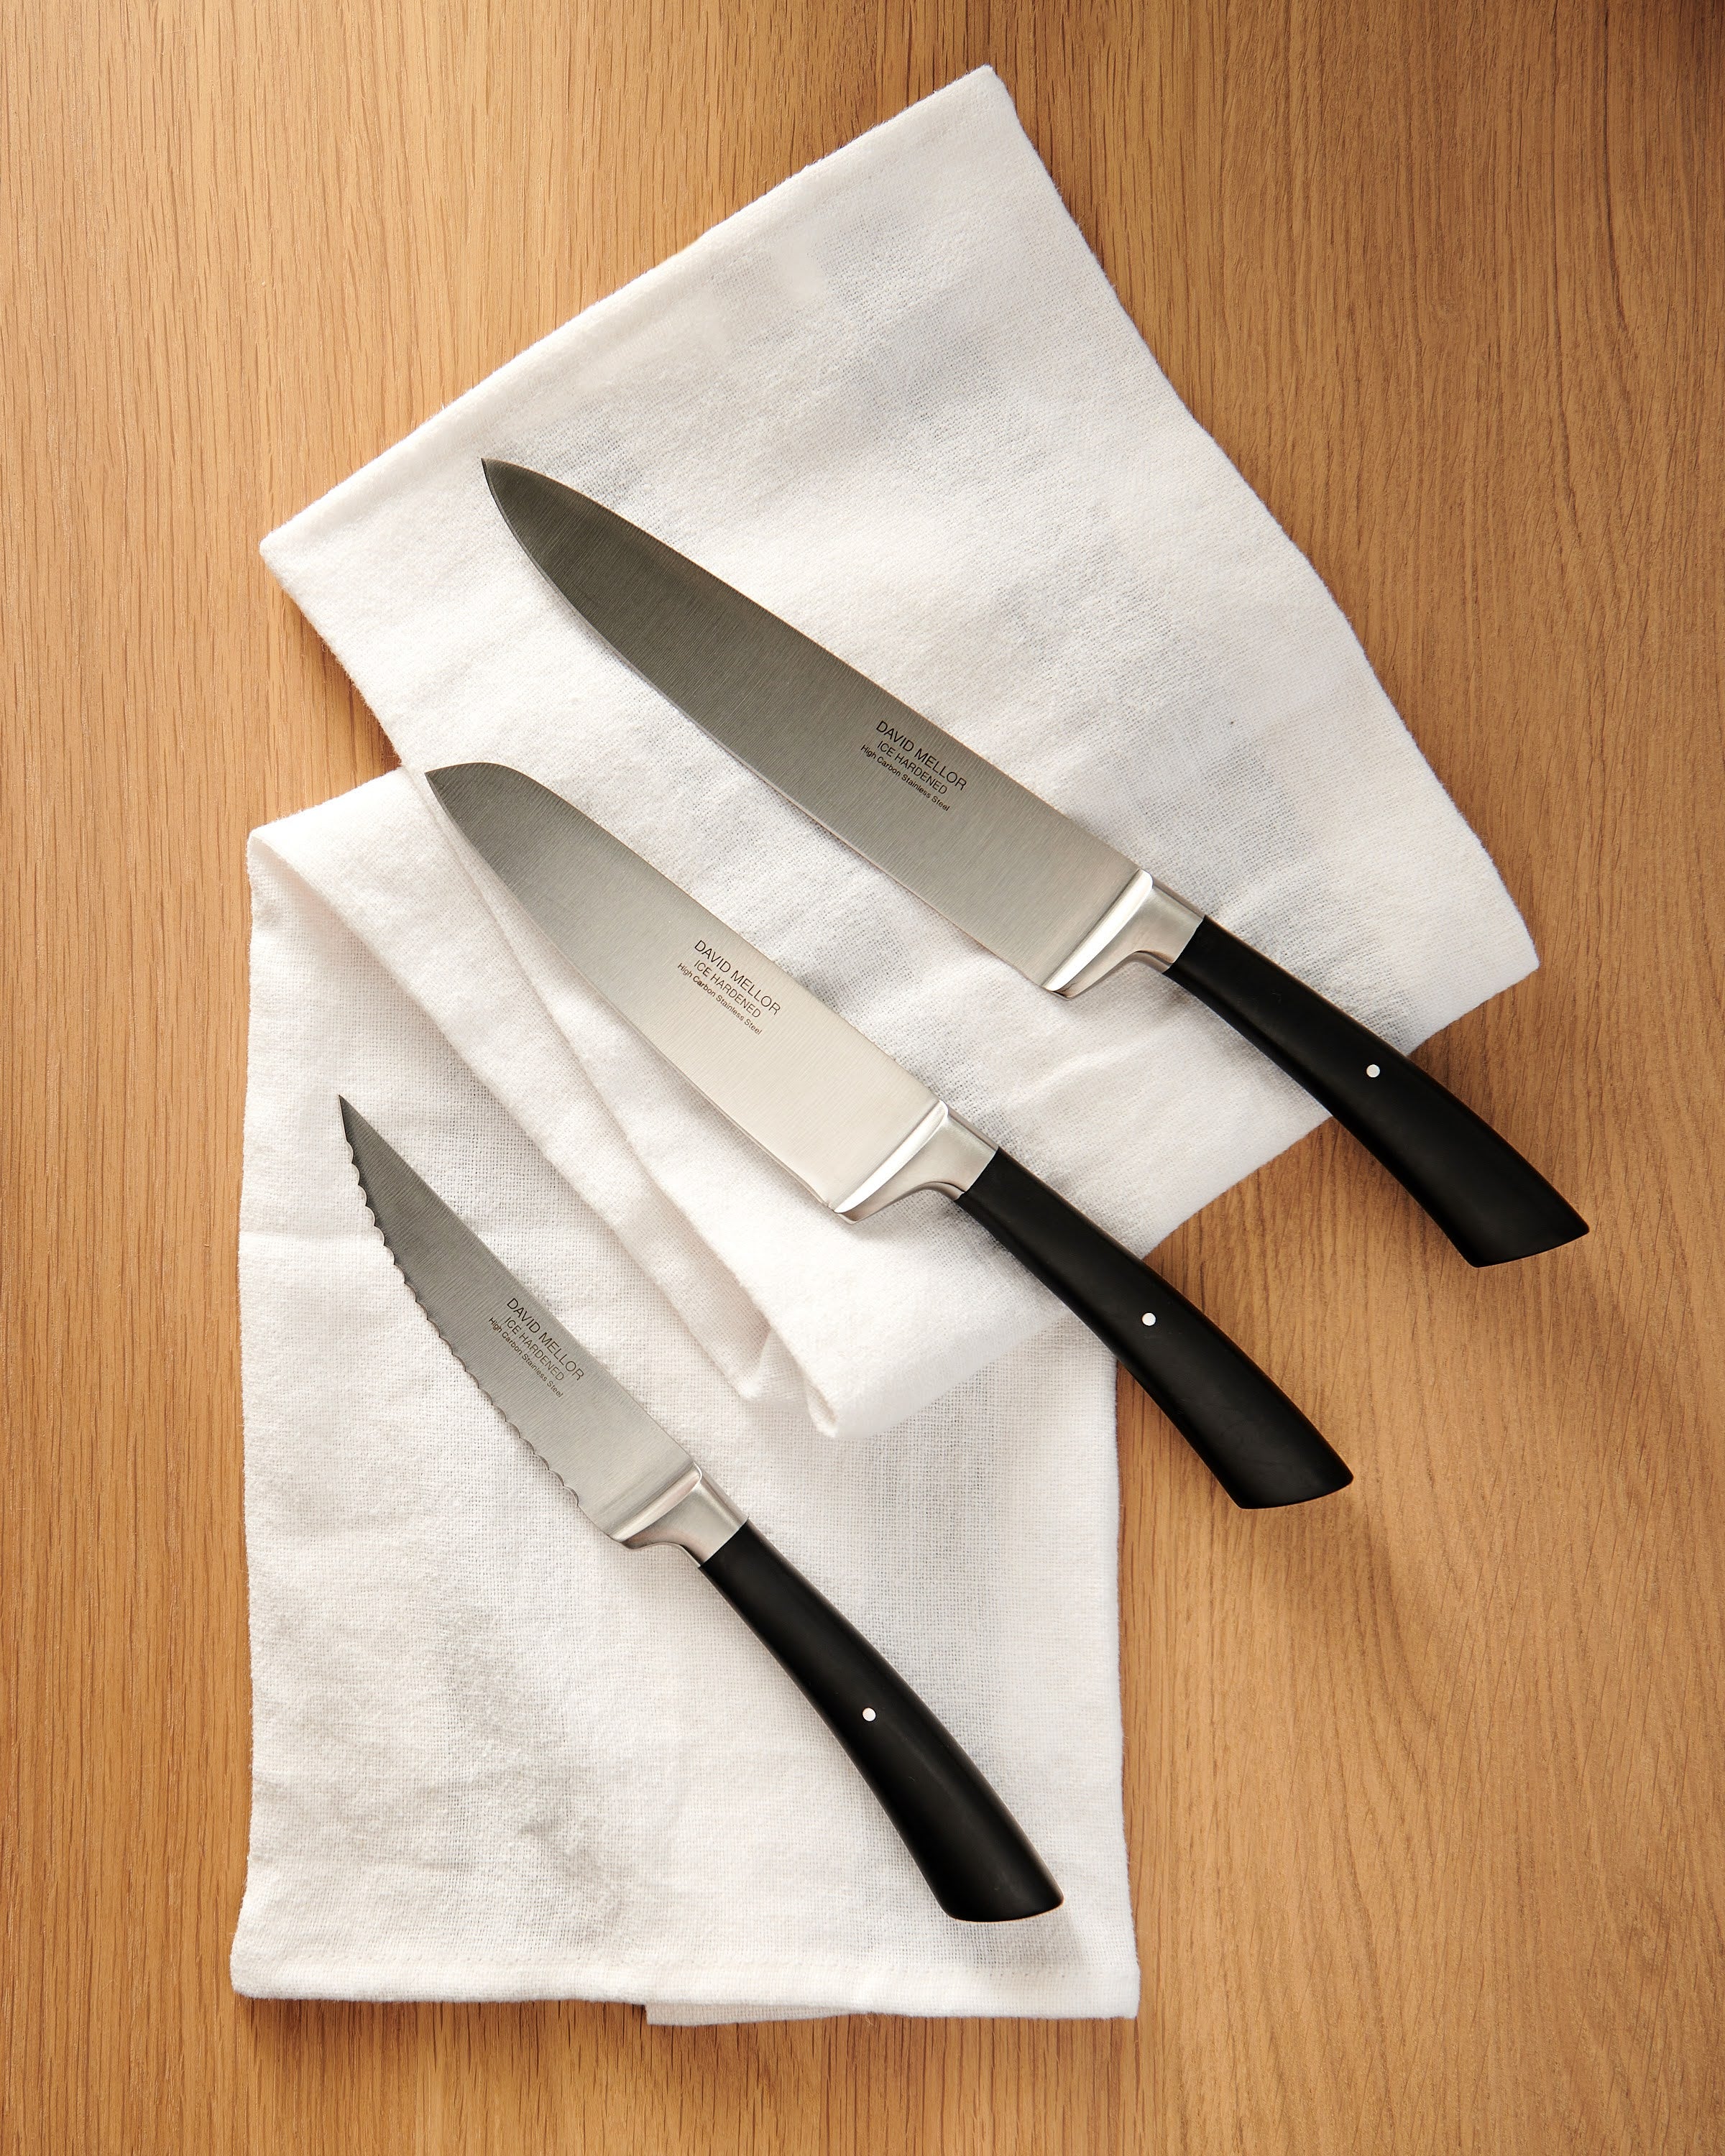 Kitchen Knives + Accessories